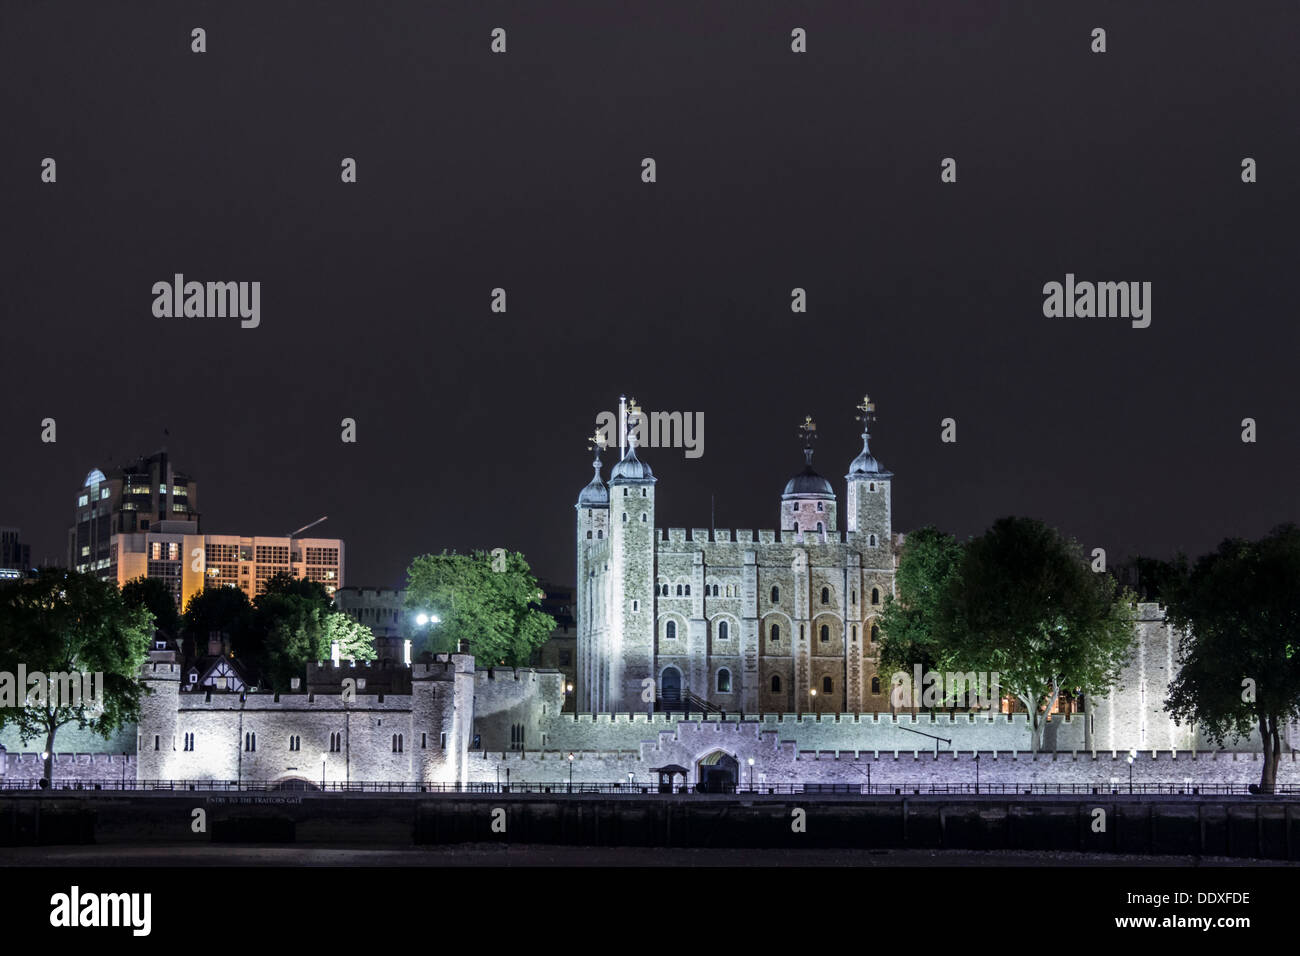 Tower of London Castle taken from across the Thames River Stock Photo